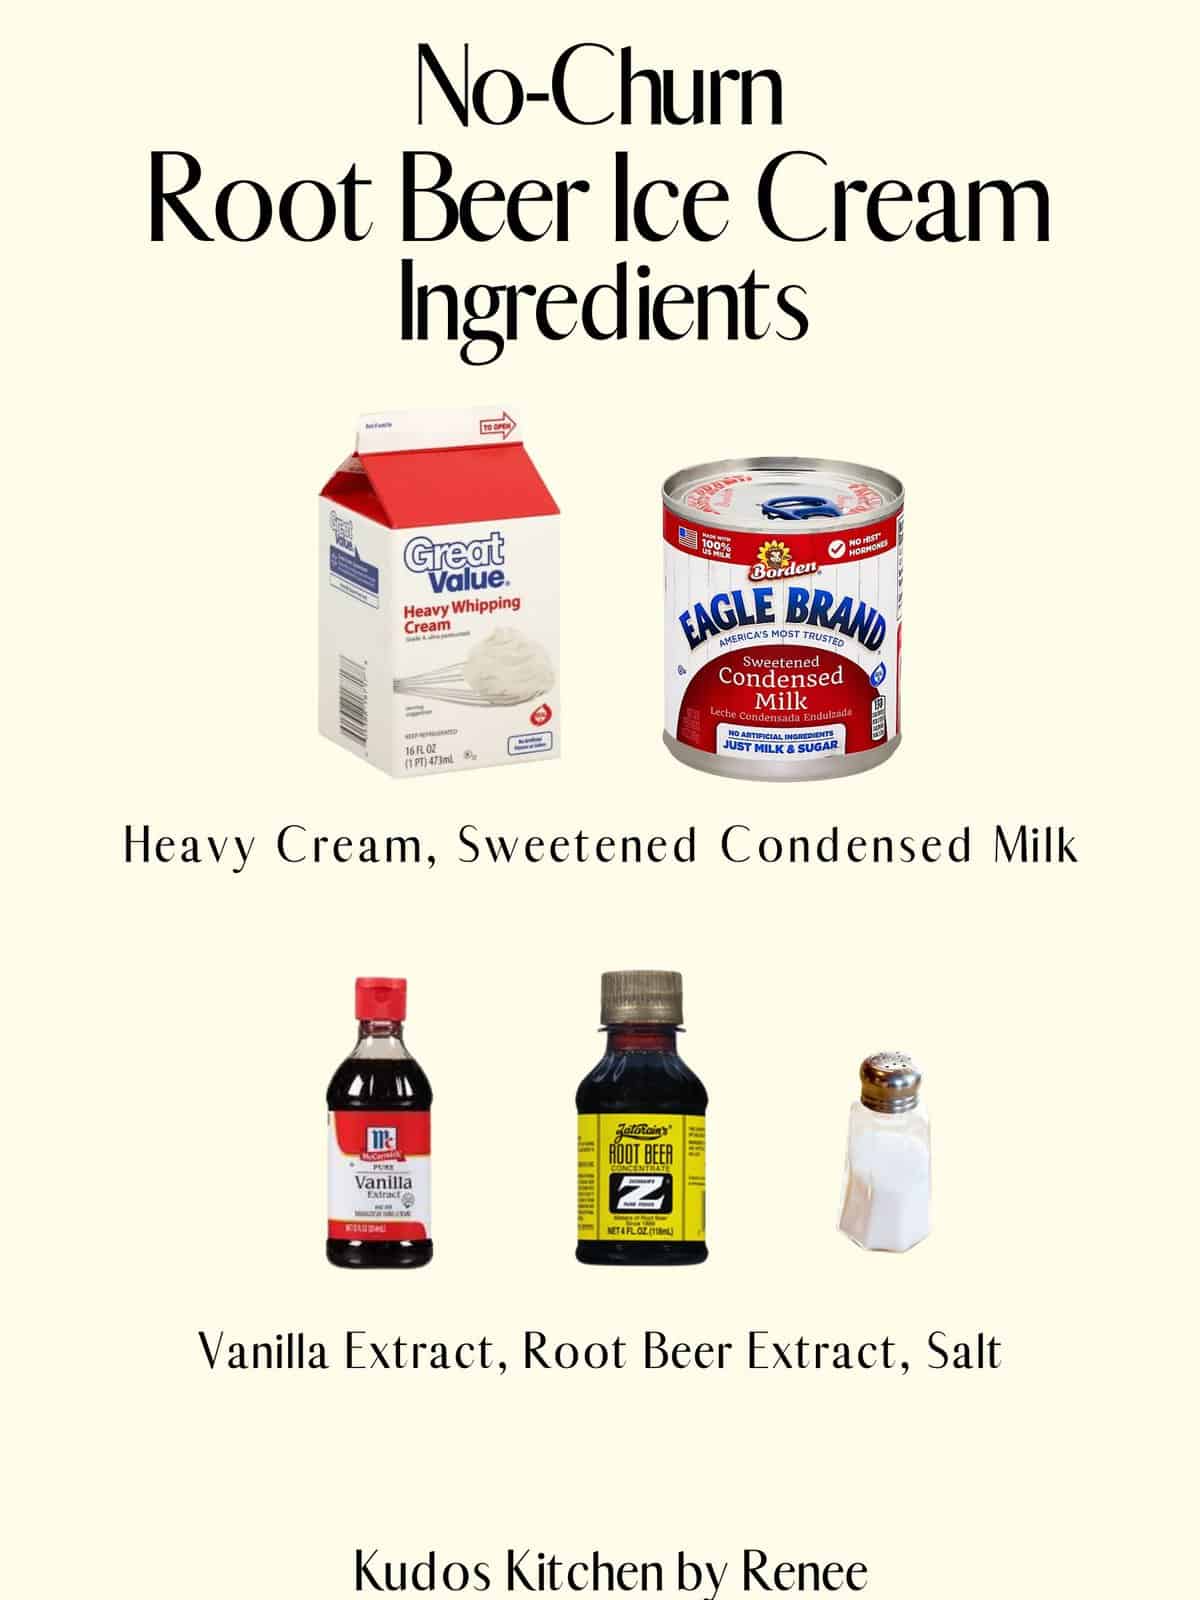 A visual ingredient list for making no-churn root beer ice cream.